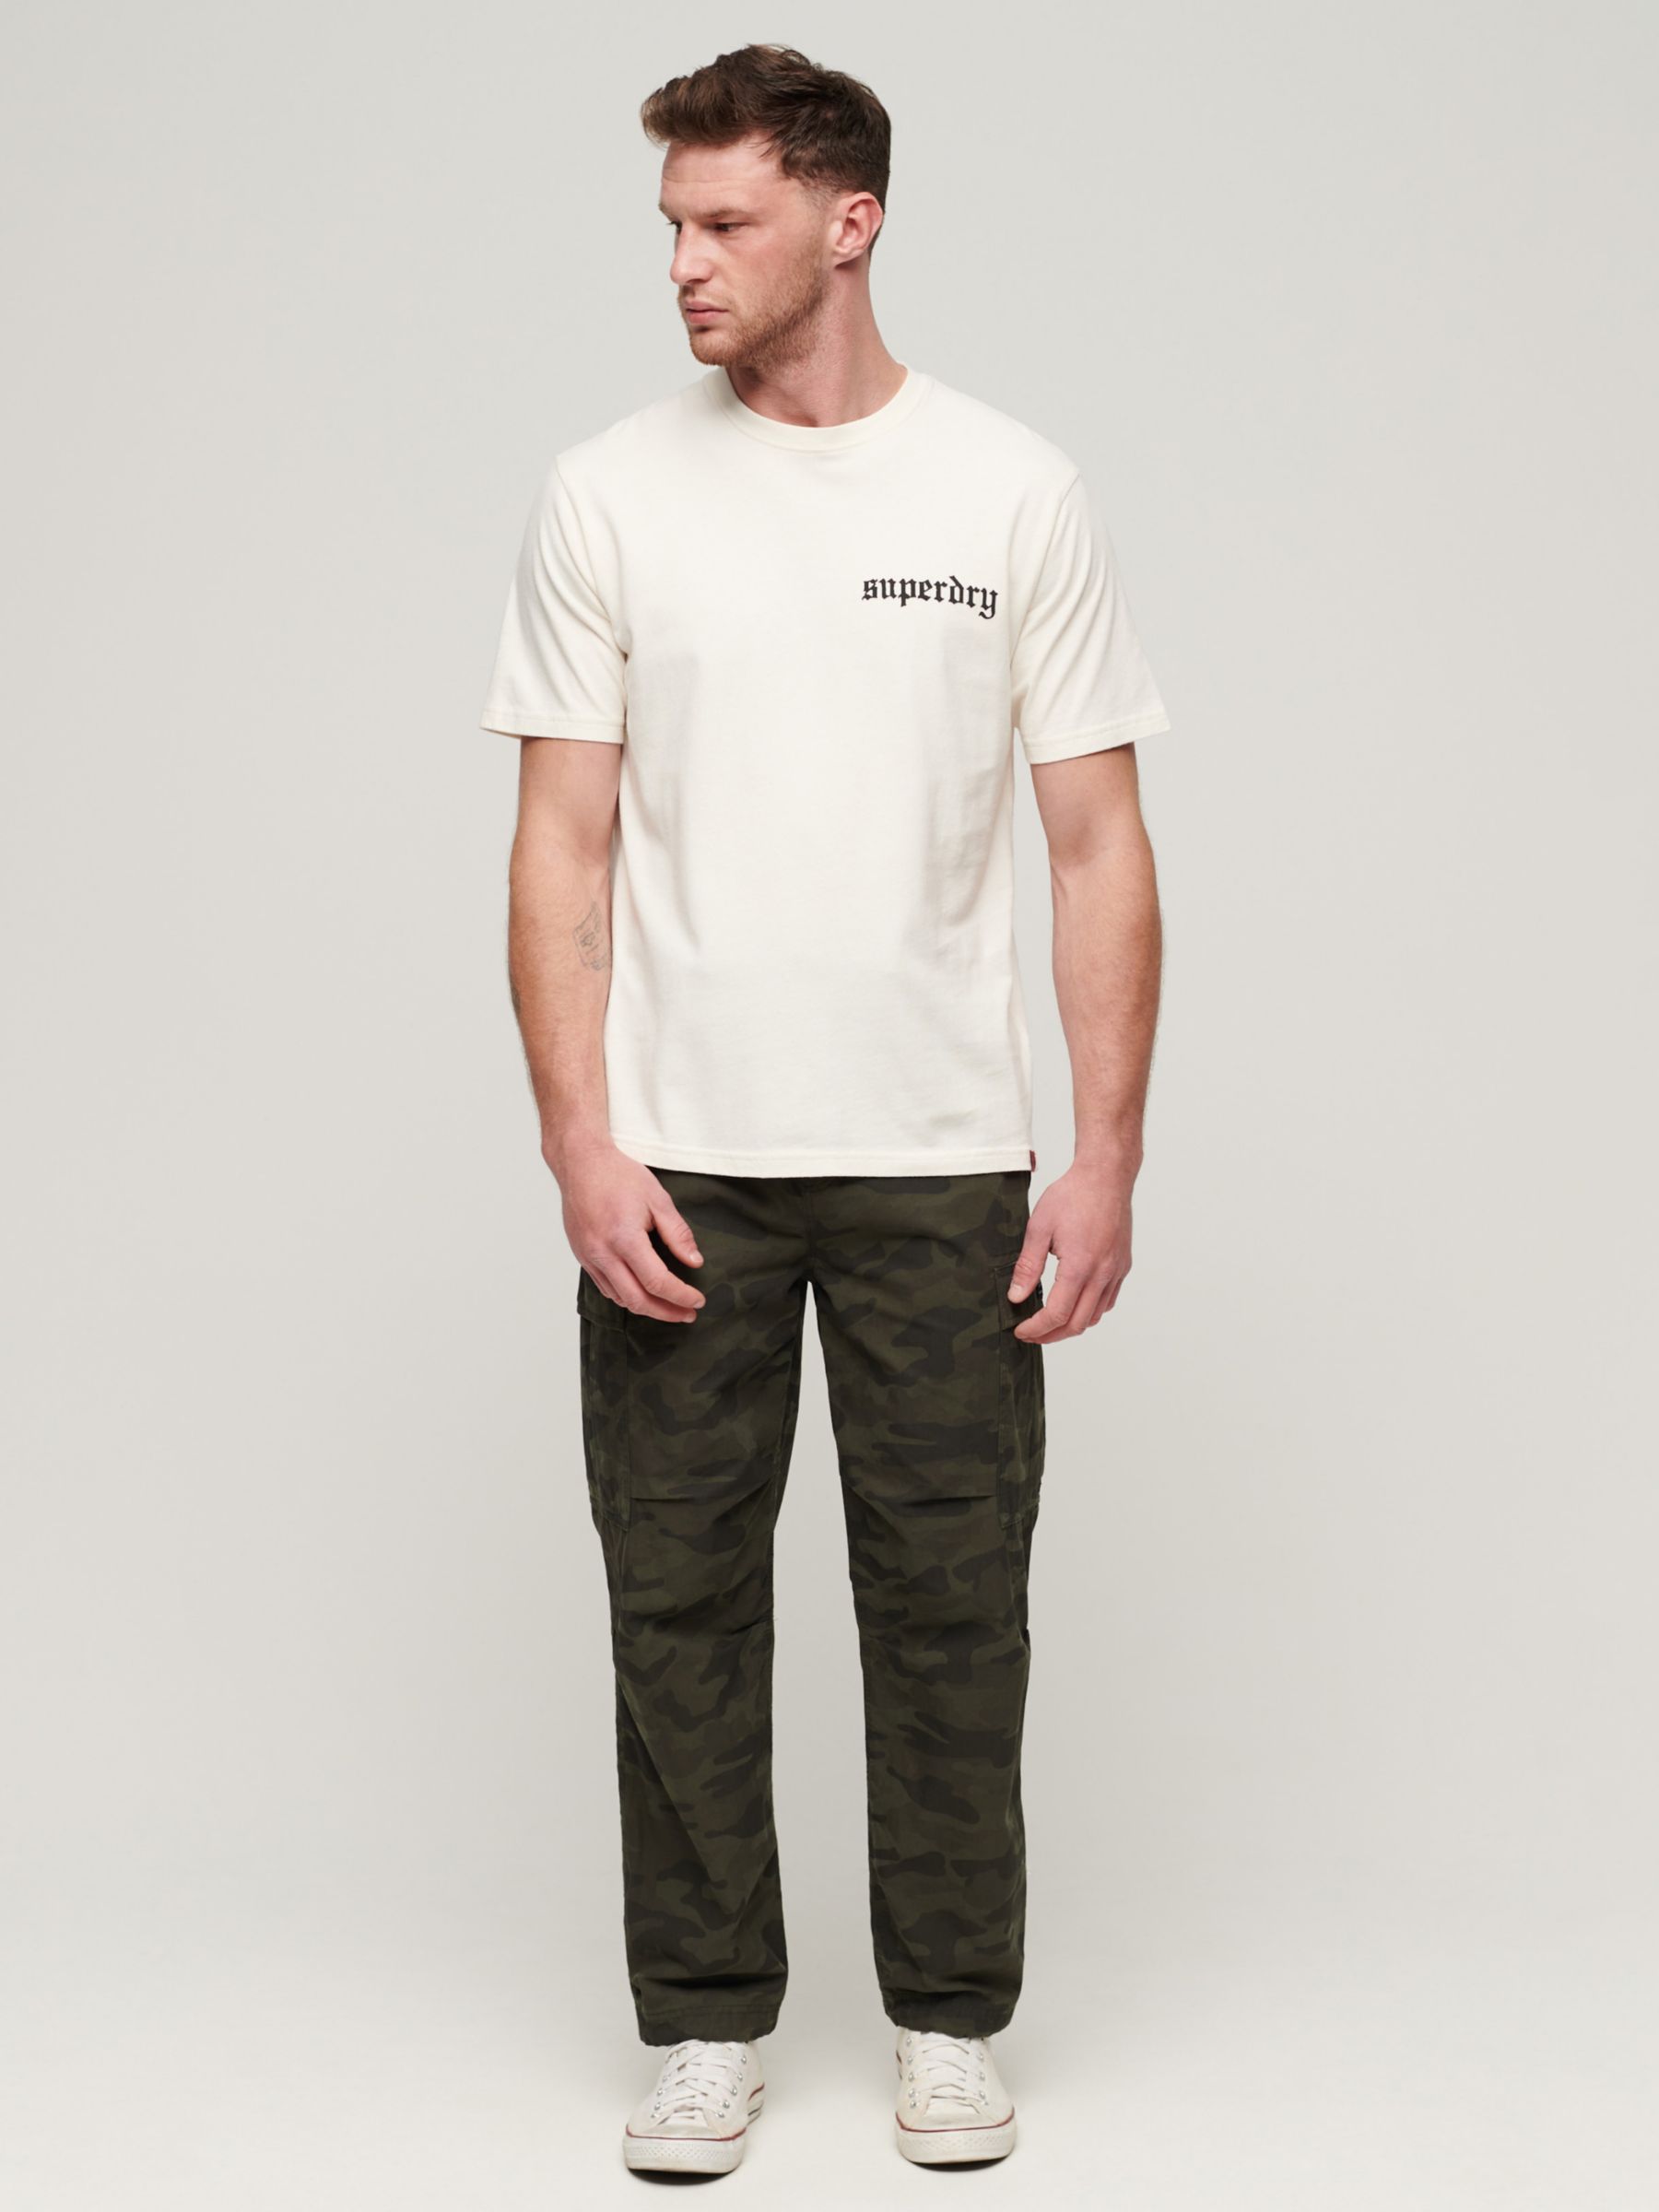 Buy Superdry Tattoo Graphic Loose Fit T-Shirt Online at johnlewis.com